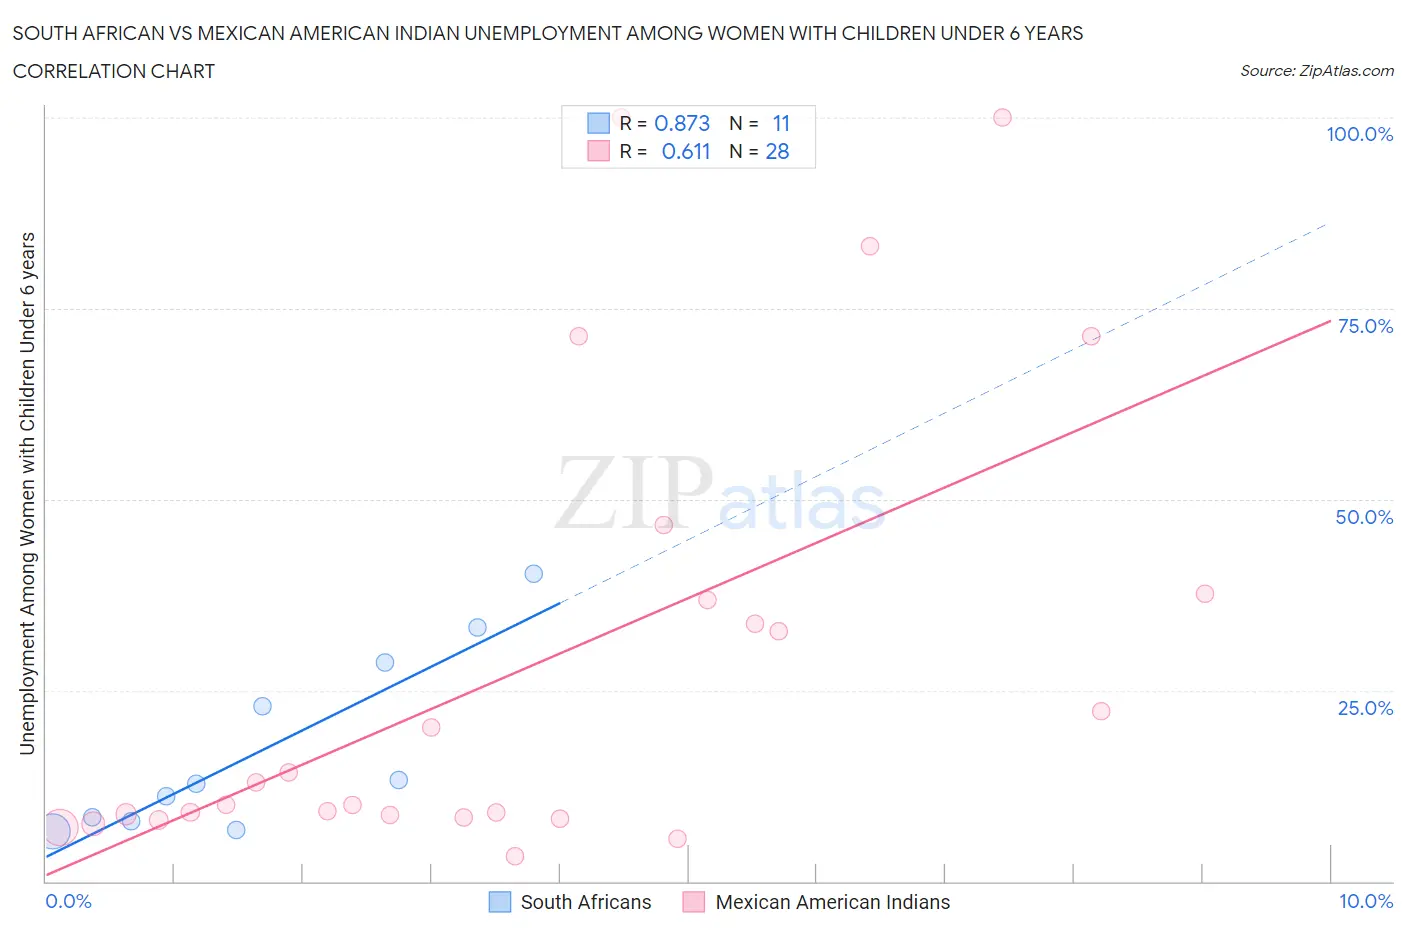 South African vs Mexican American Indian Unemployment Among Women with Children Under 6 years